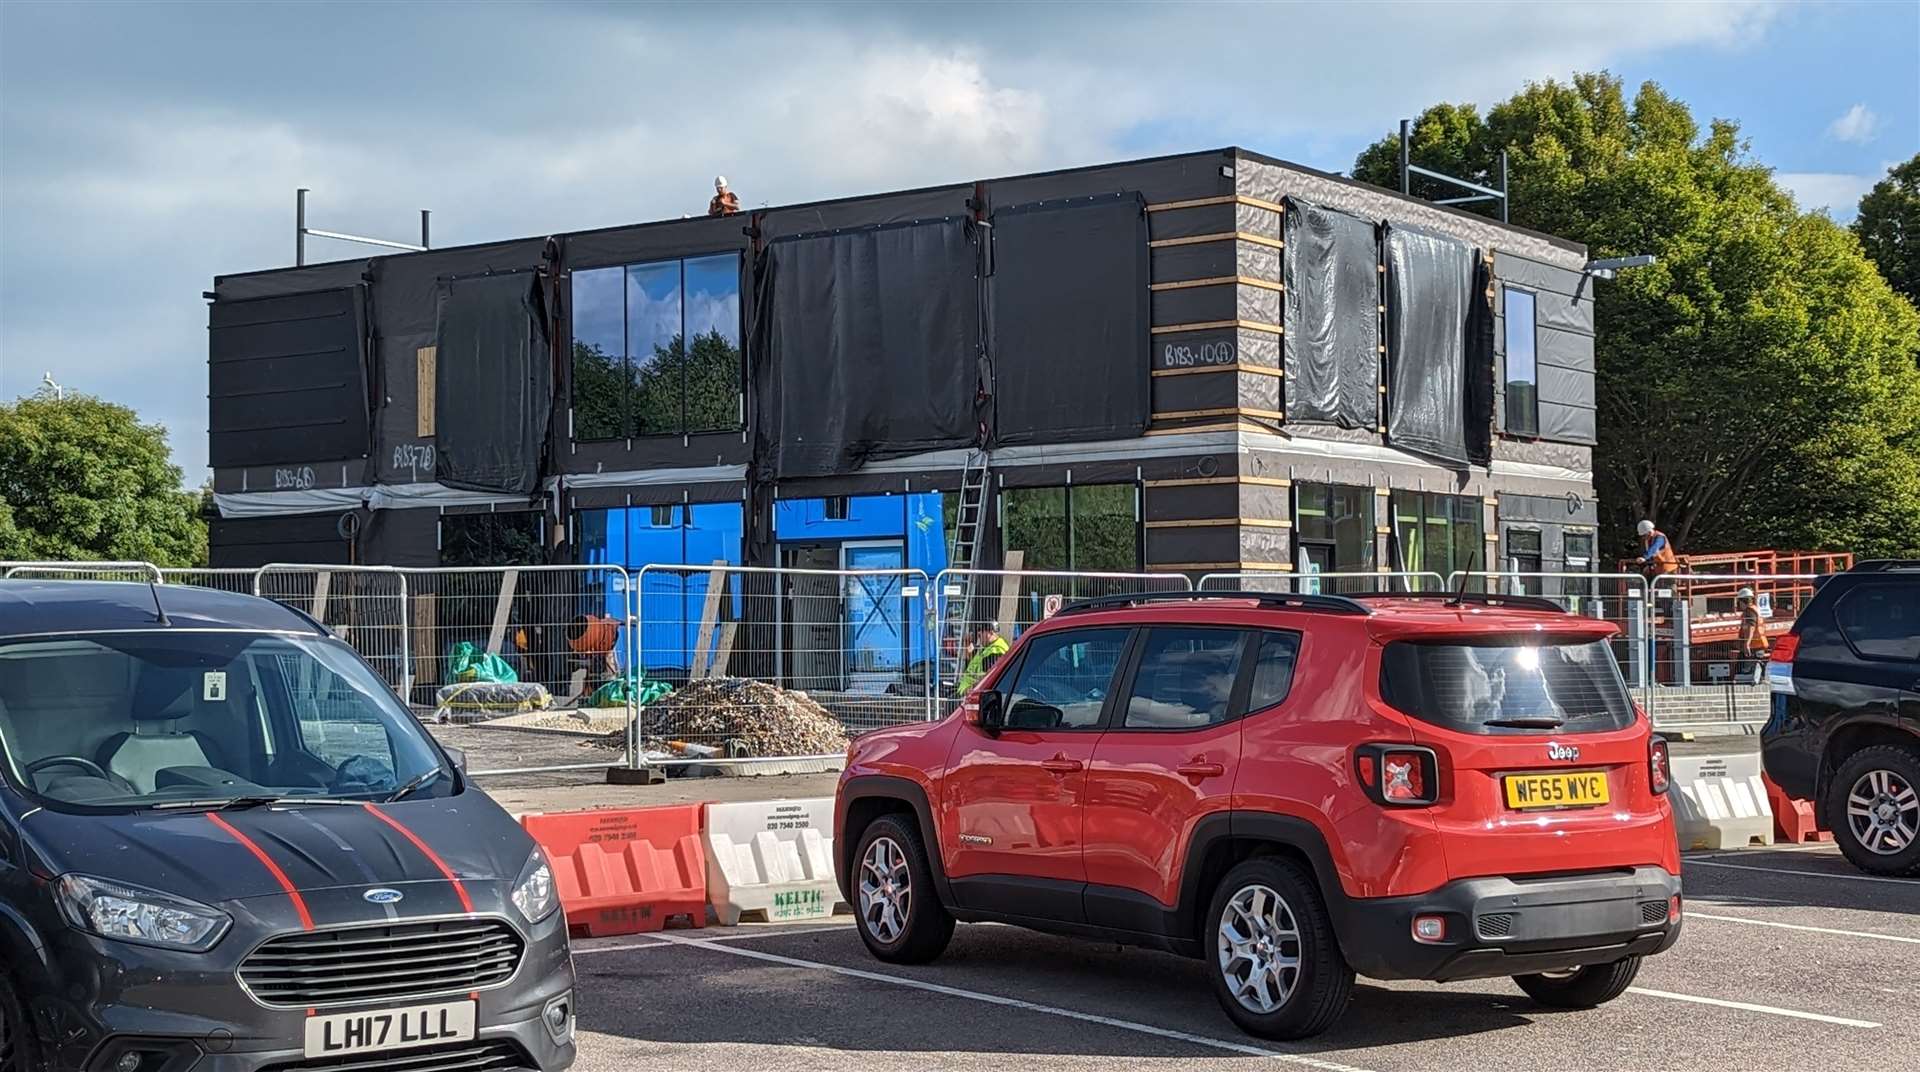 The new McDonald's drive-thru is in the far corner of a supermarket car park